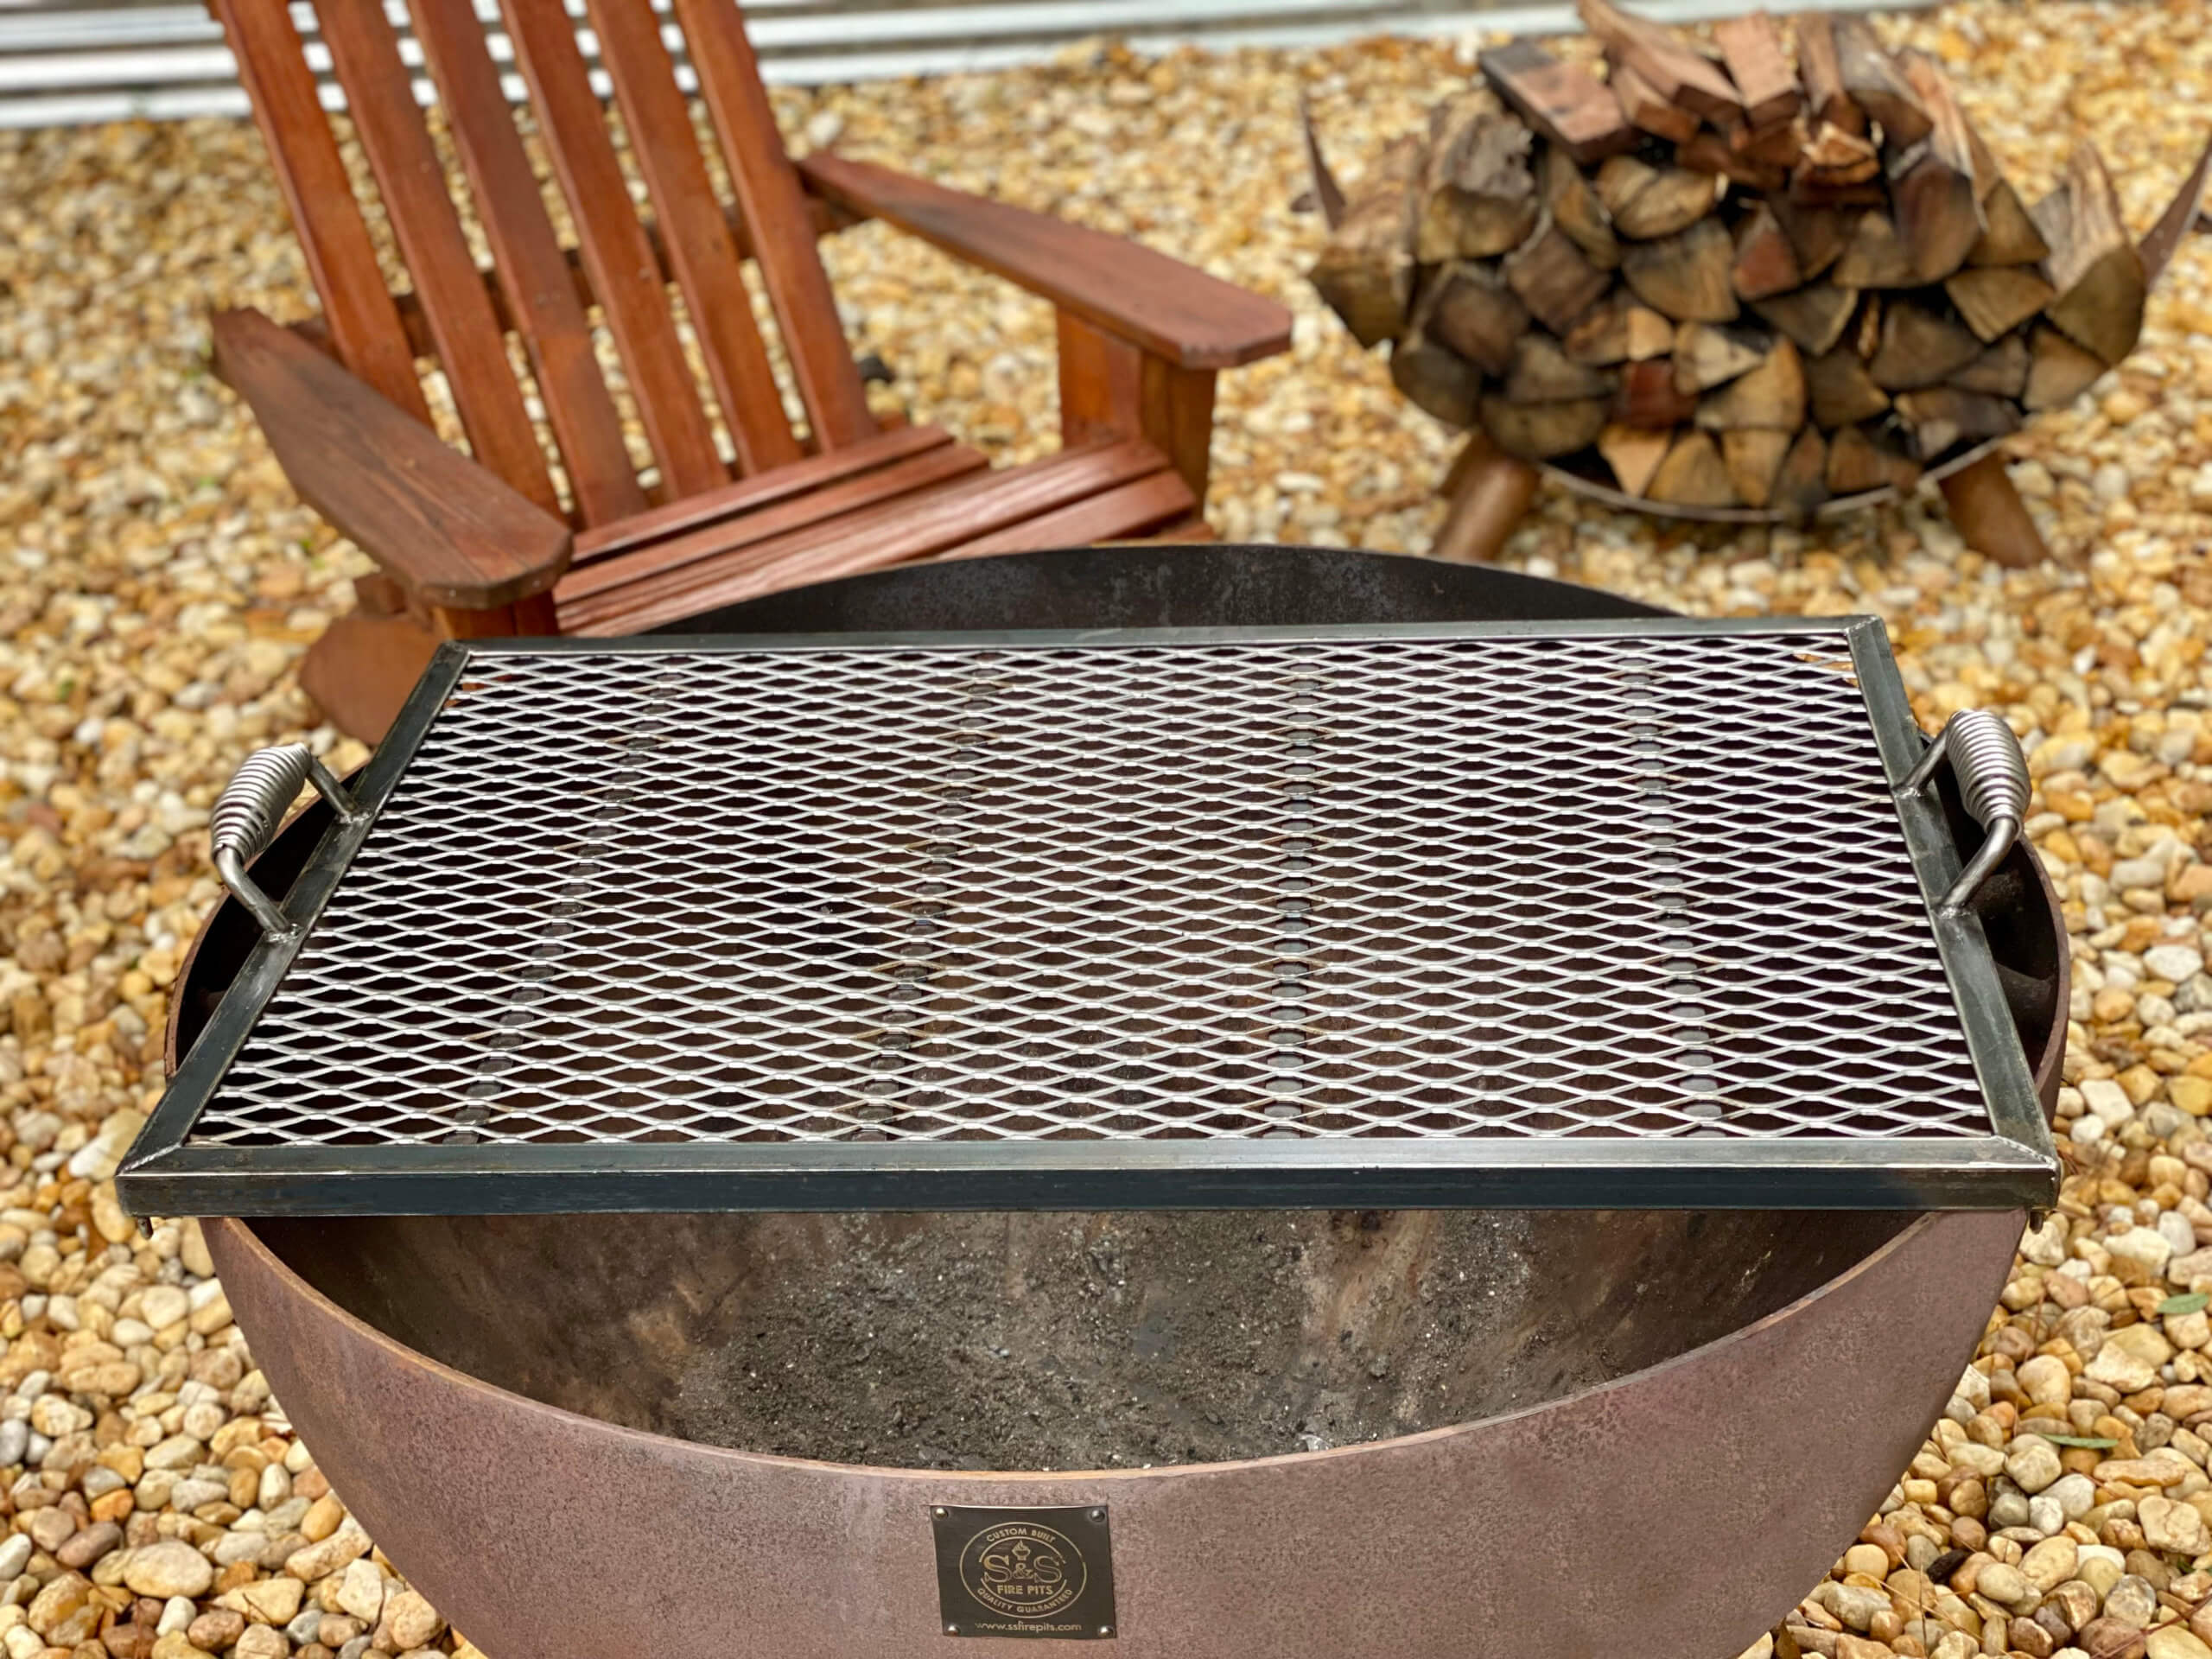 41 Heavy Duty Handcrafted Fire Pit, Square Fire Pit Cooking Grate